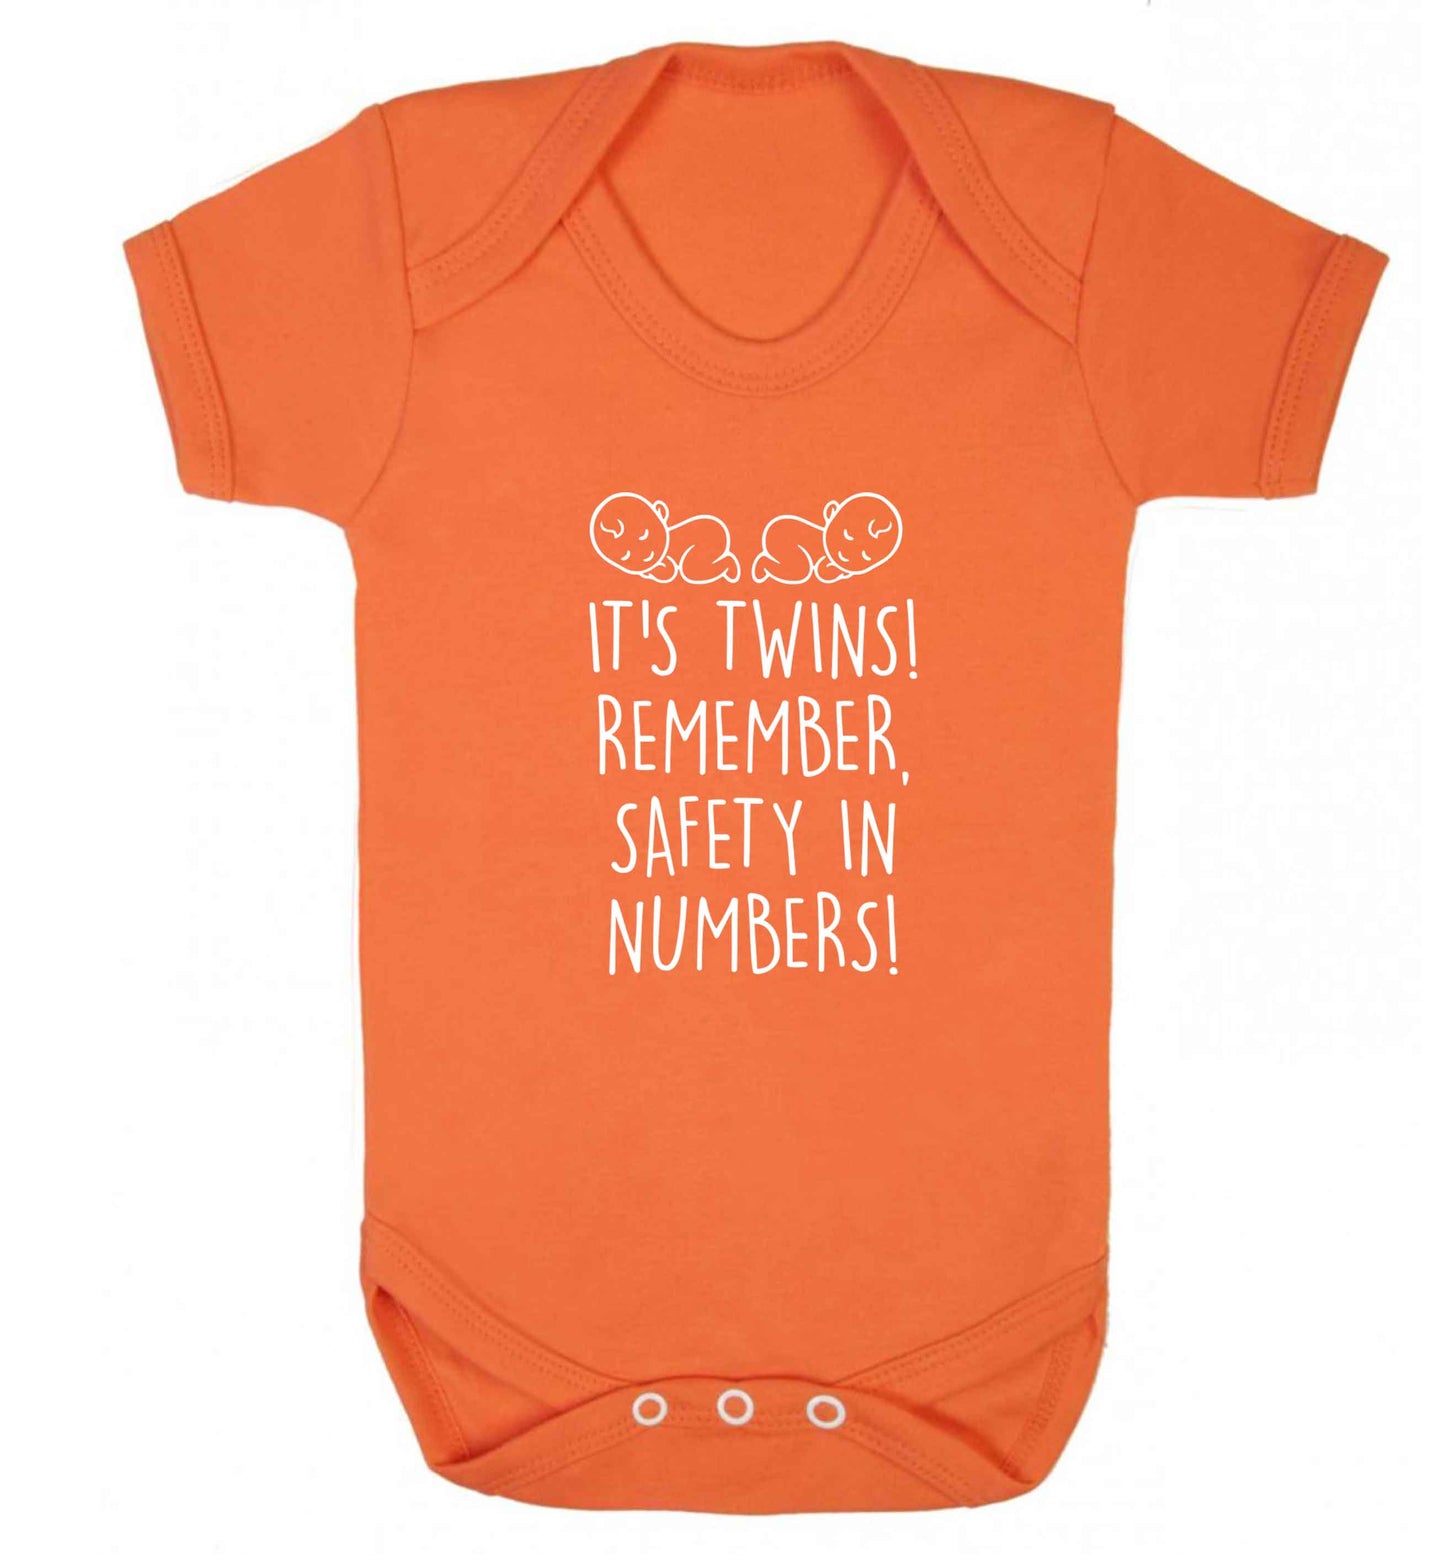 It's twins! Remember safety in numbers! baby vest orange 18-24 months